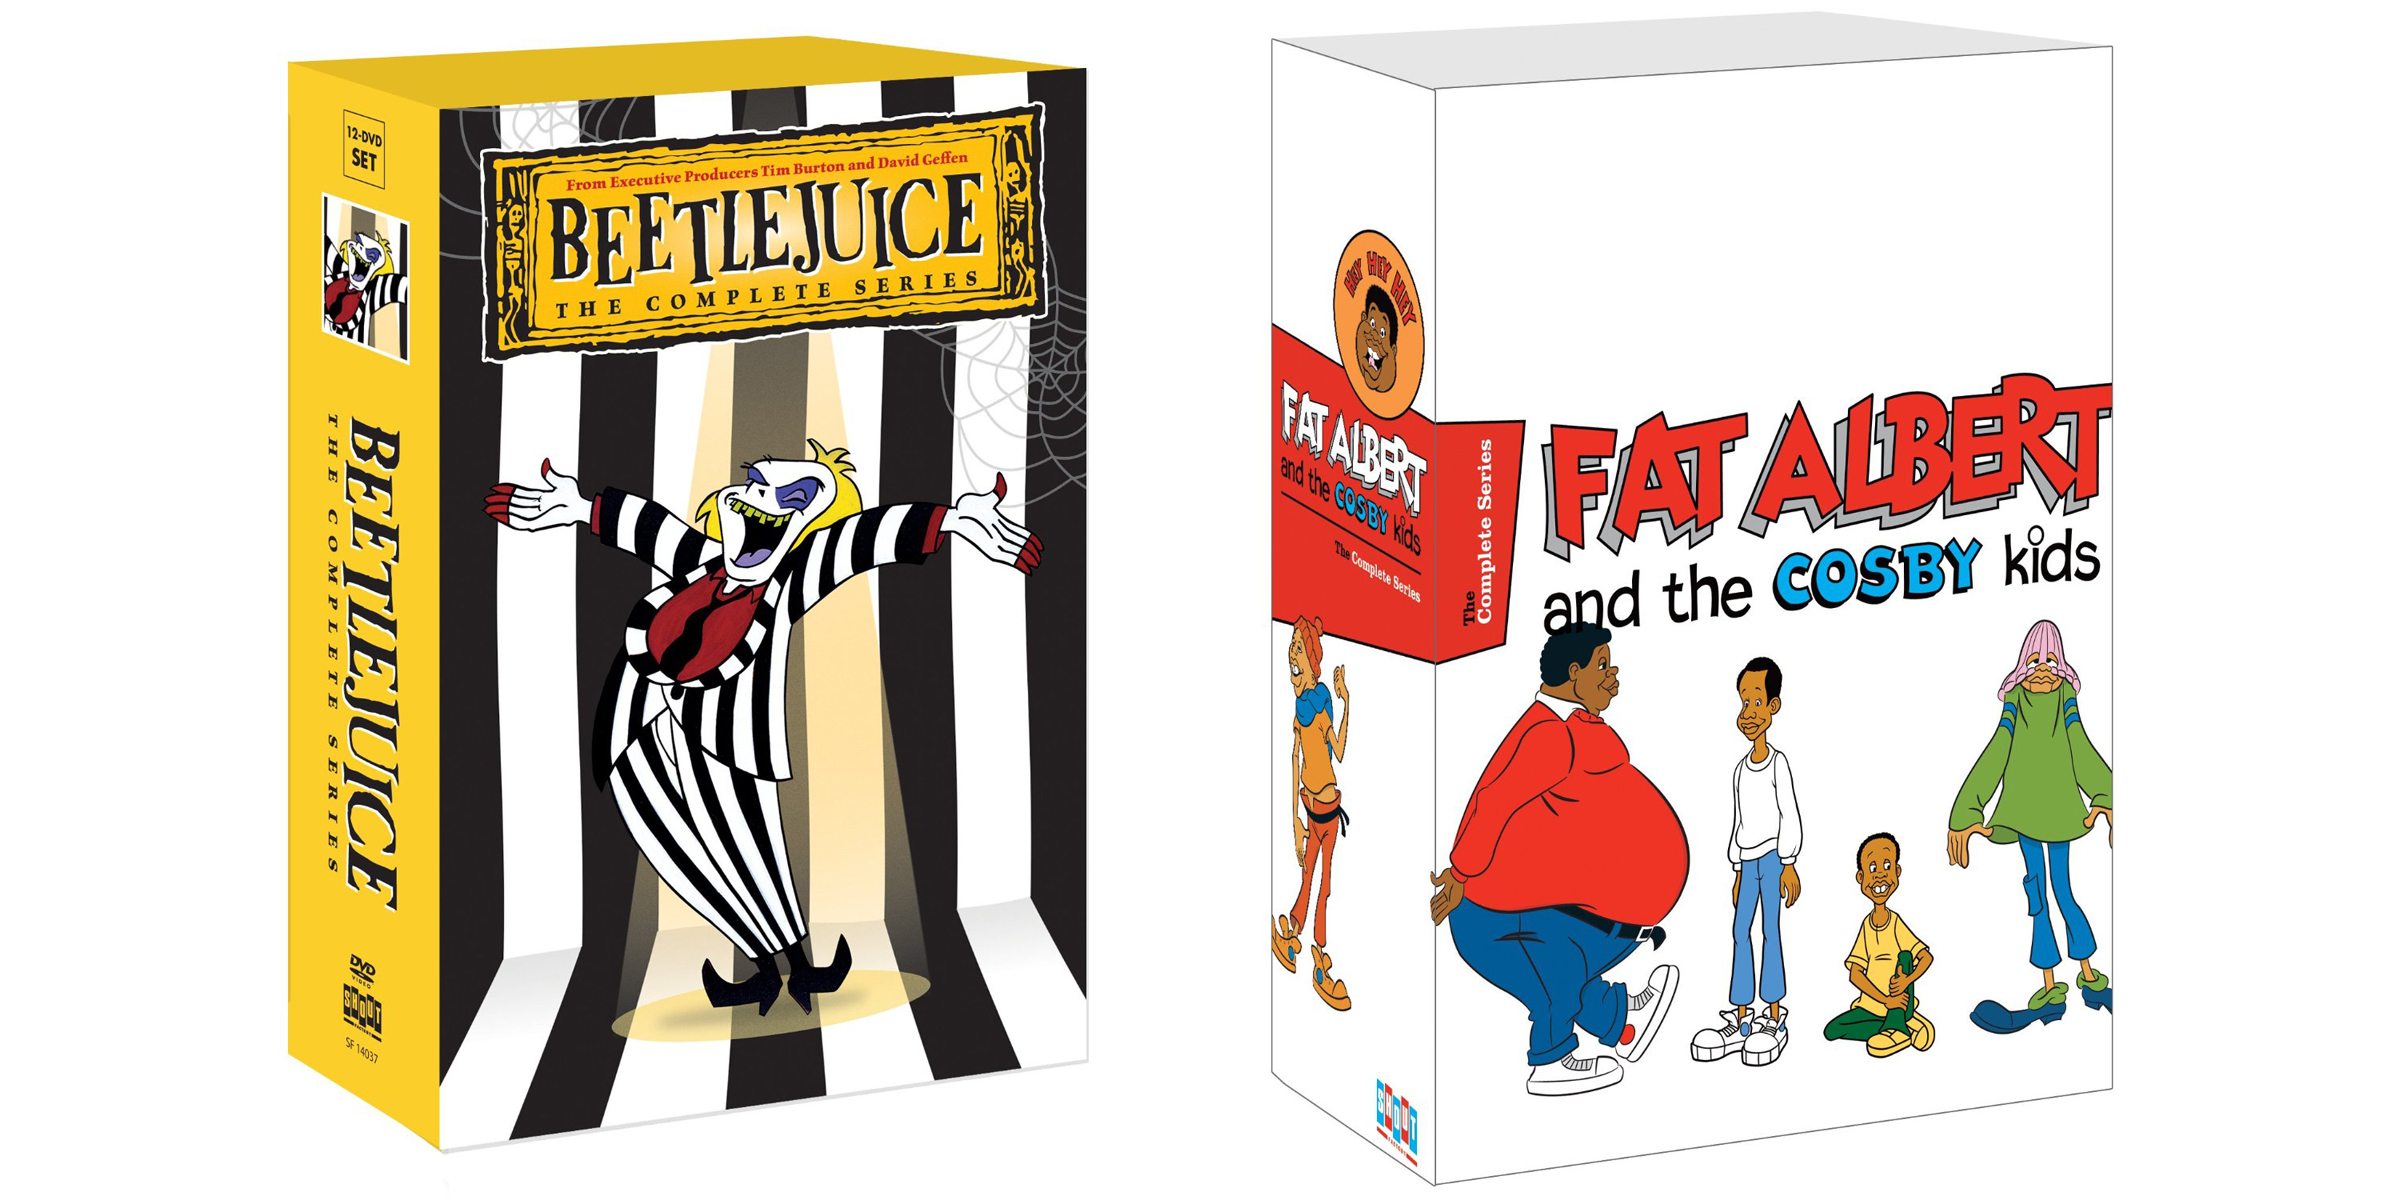 Beetlejuice and Fat Albert covers